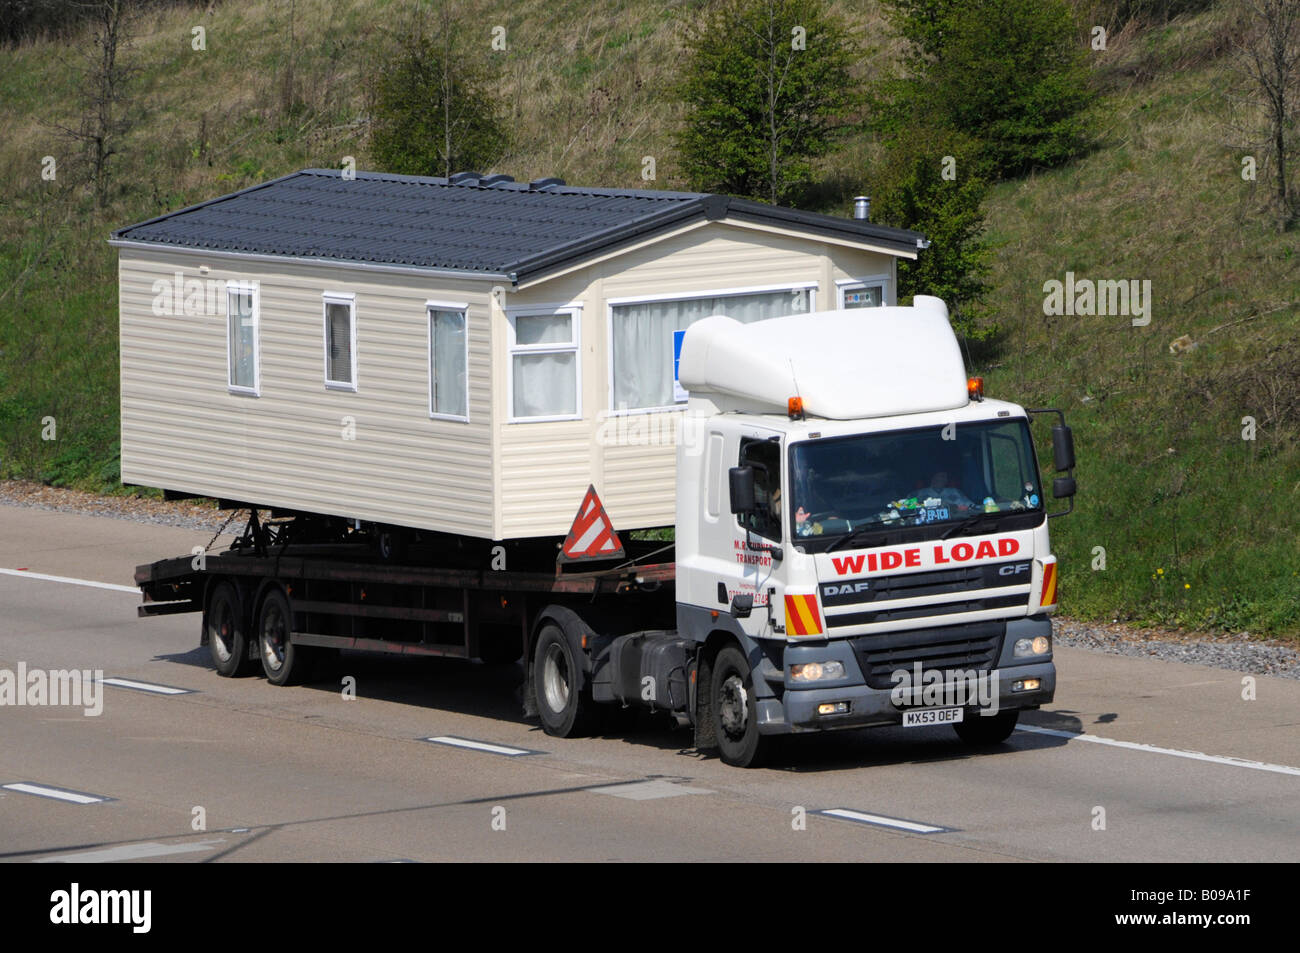 M25 motorway DAF lorry with wide load prefabricated mobile home Stock Photo